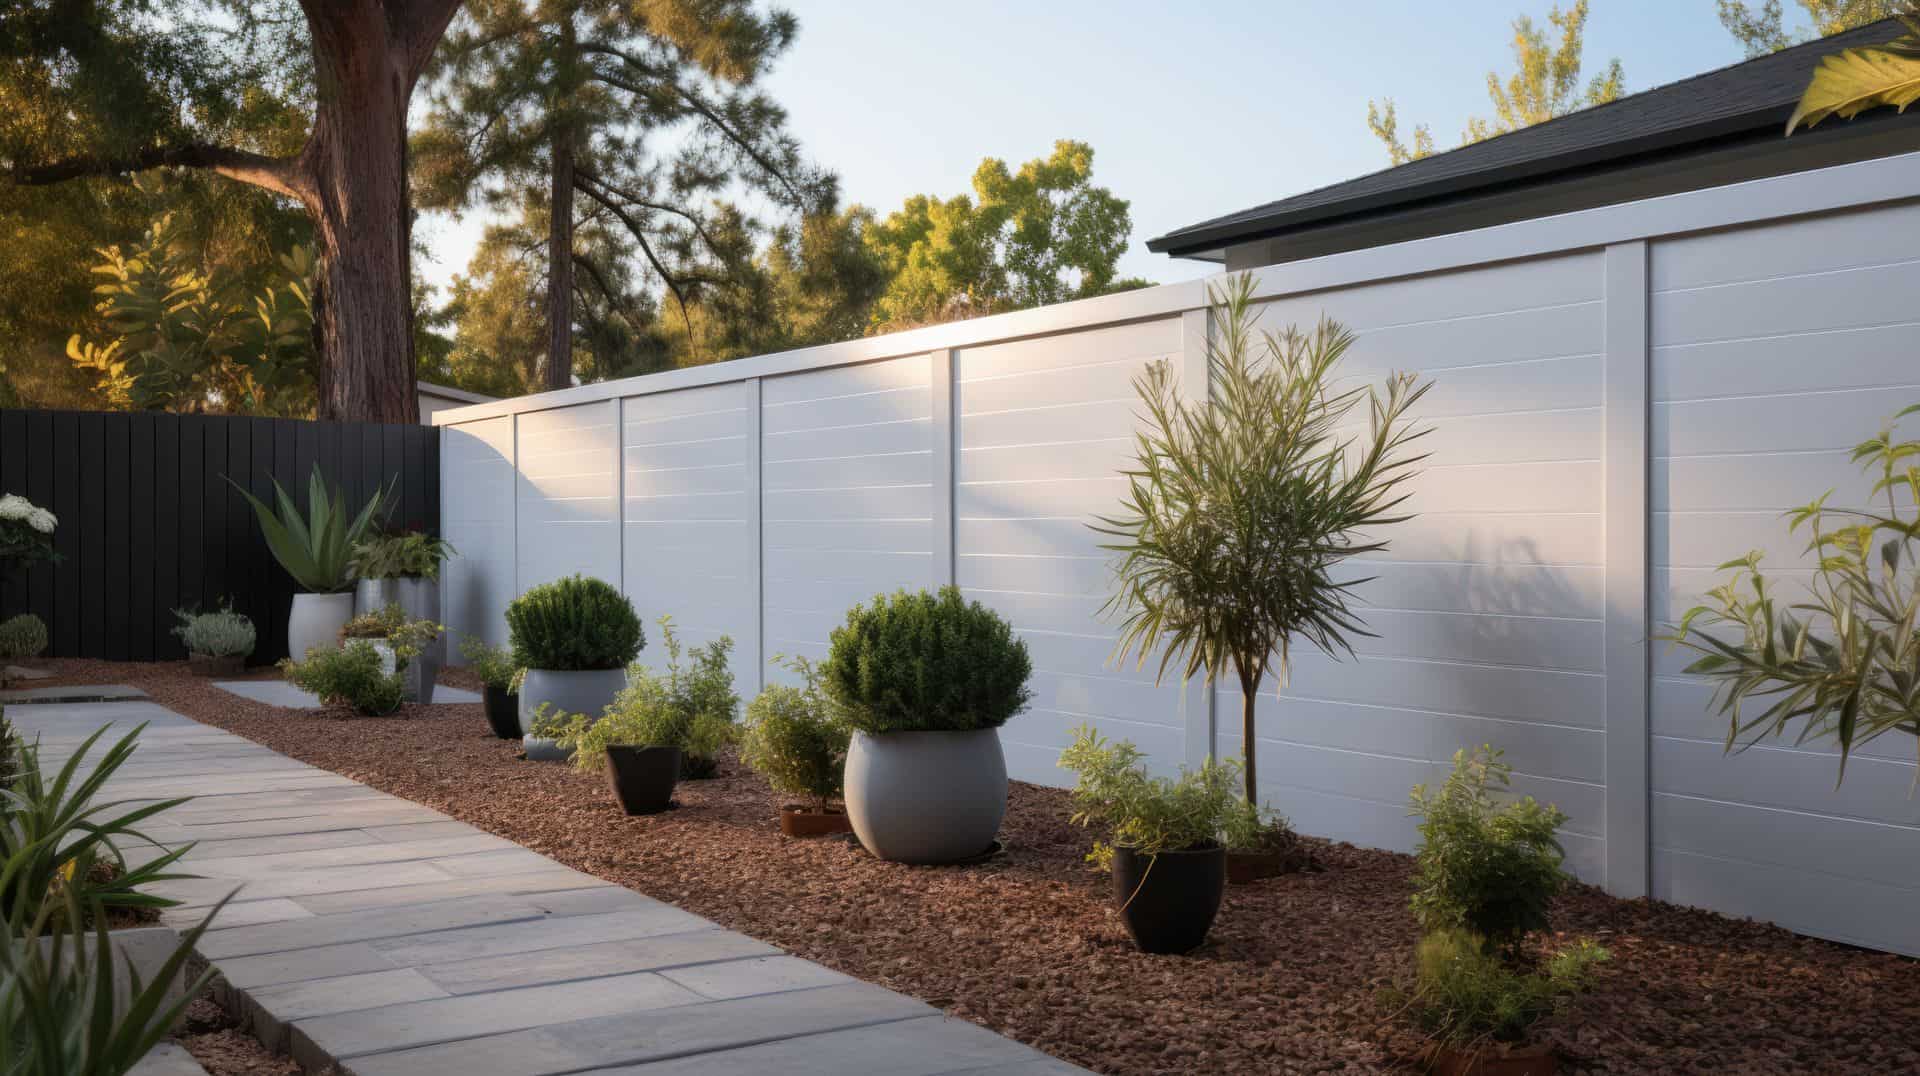 Large vinyl privacy fence separating two houses from the backyard with a small vertical garden and concrete walkway.